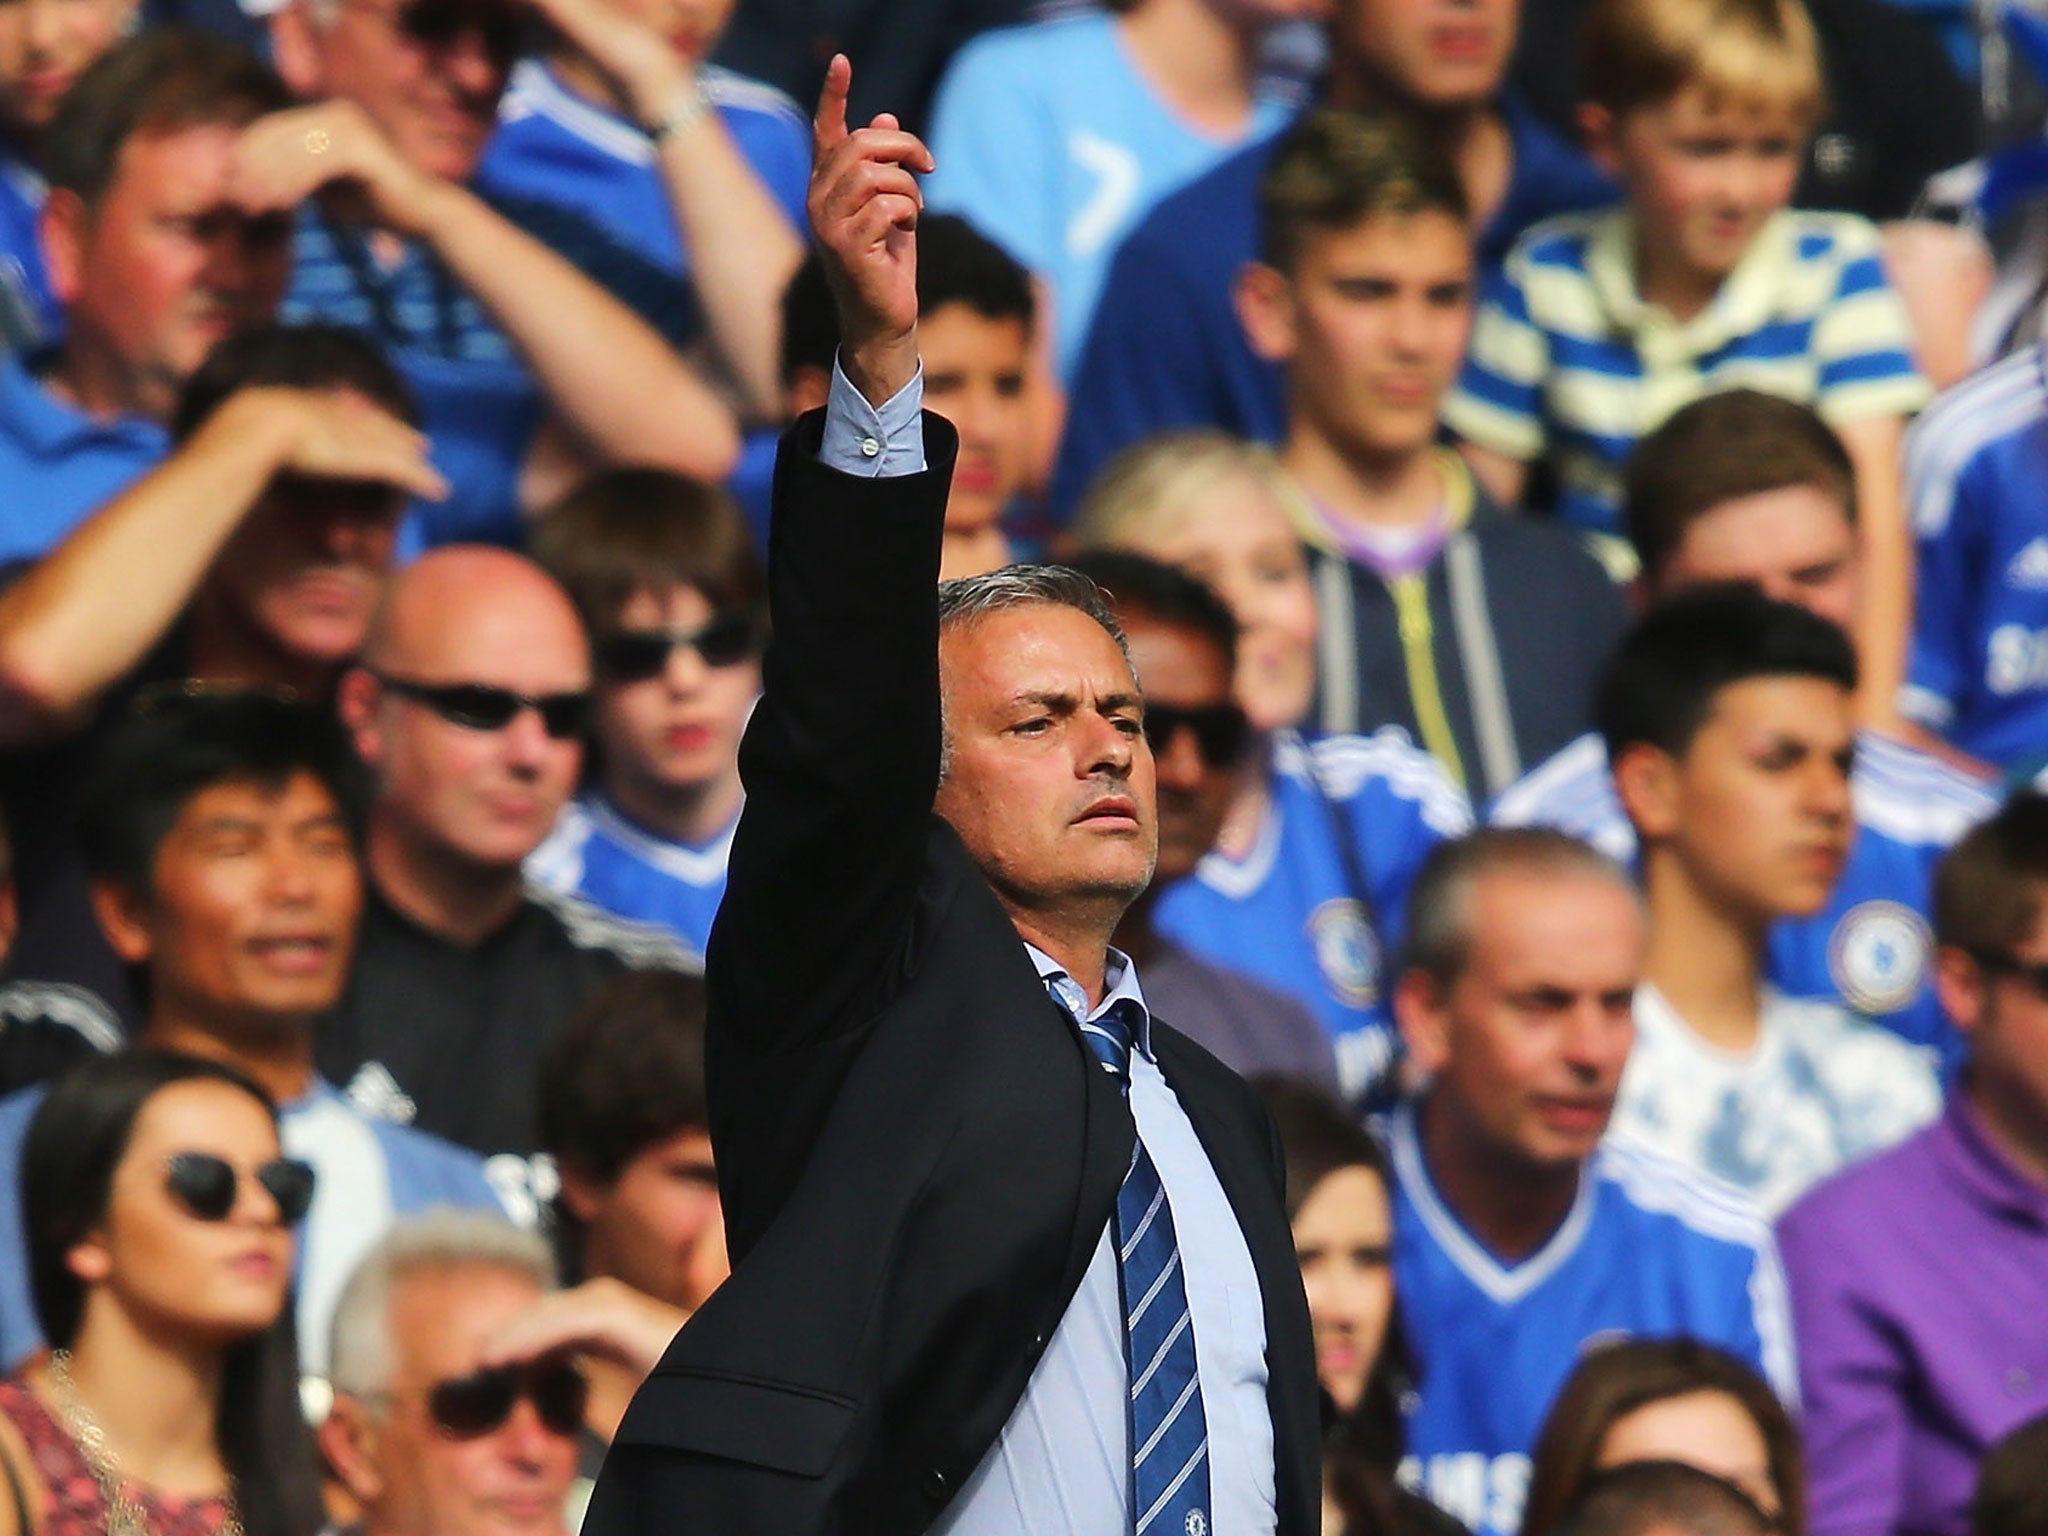 Jose Mourinho won in the first Premier League match of his second spell as Chelsea manager, beating Hull City 2-0